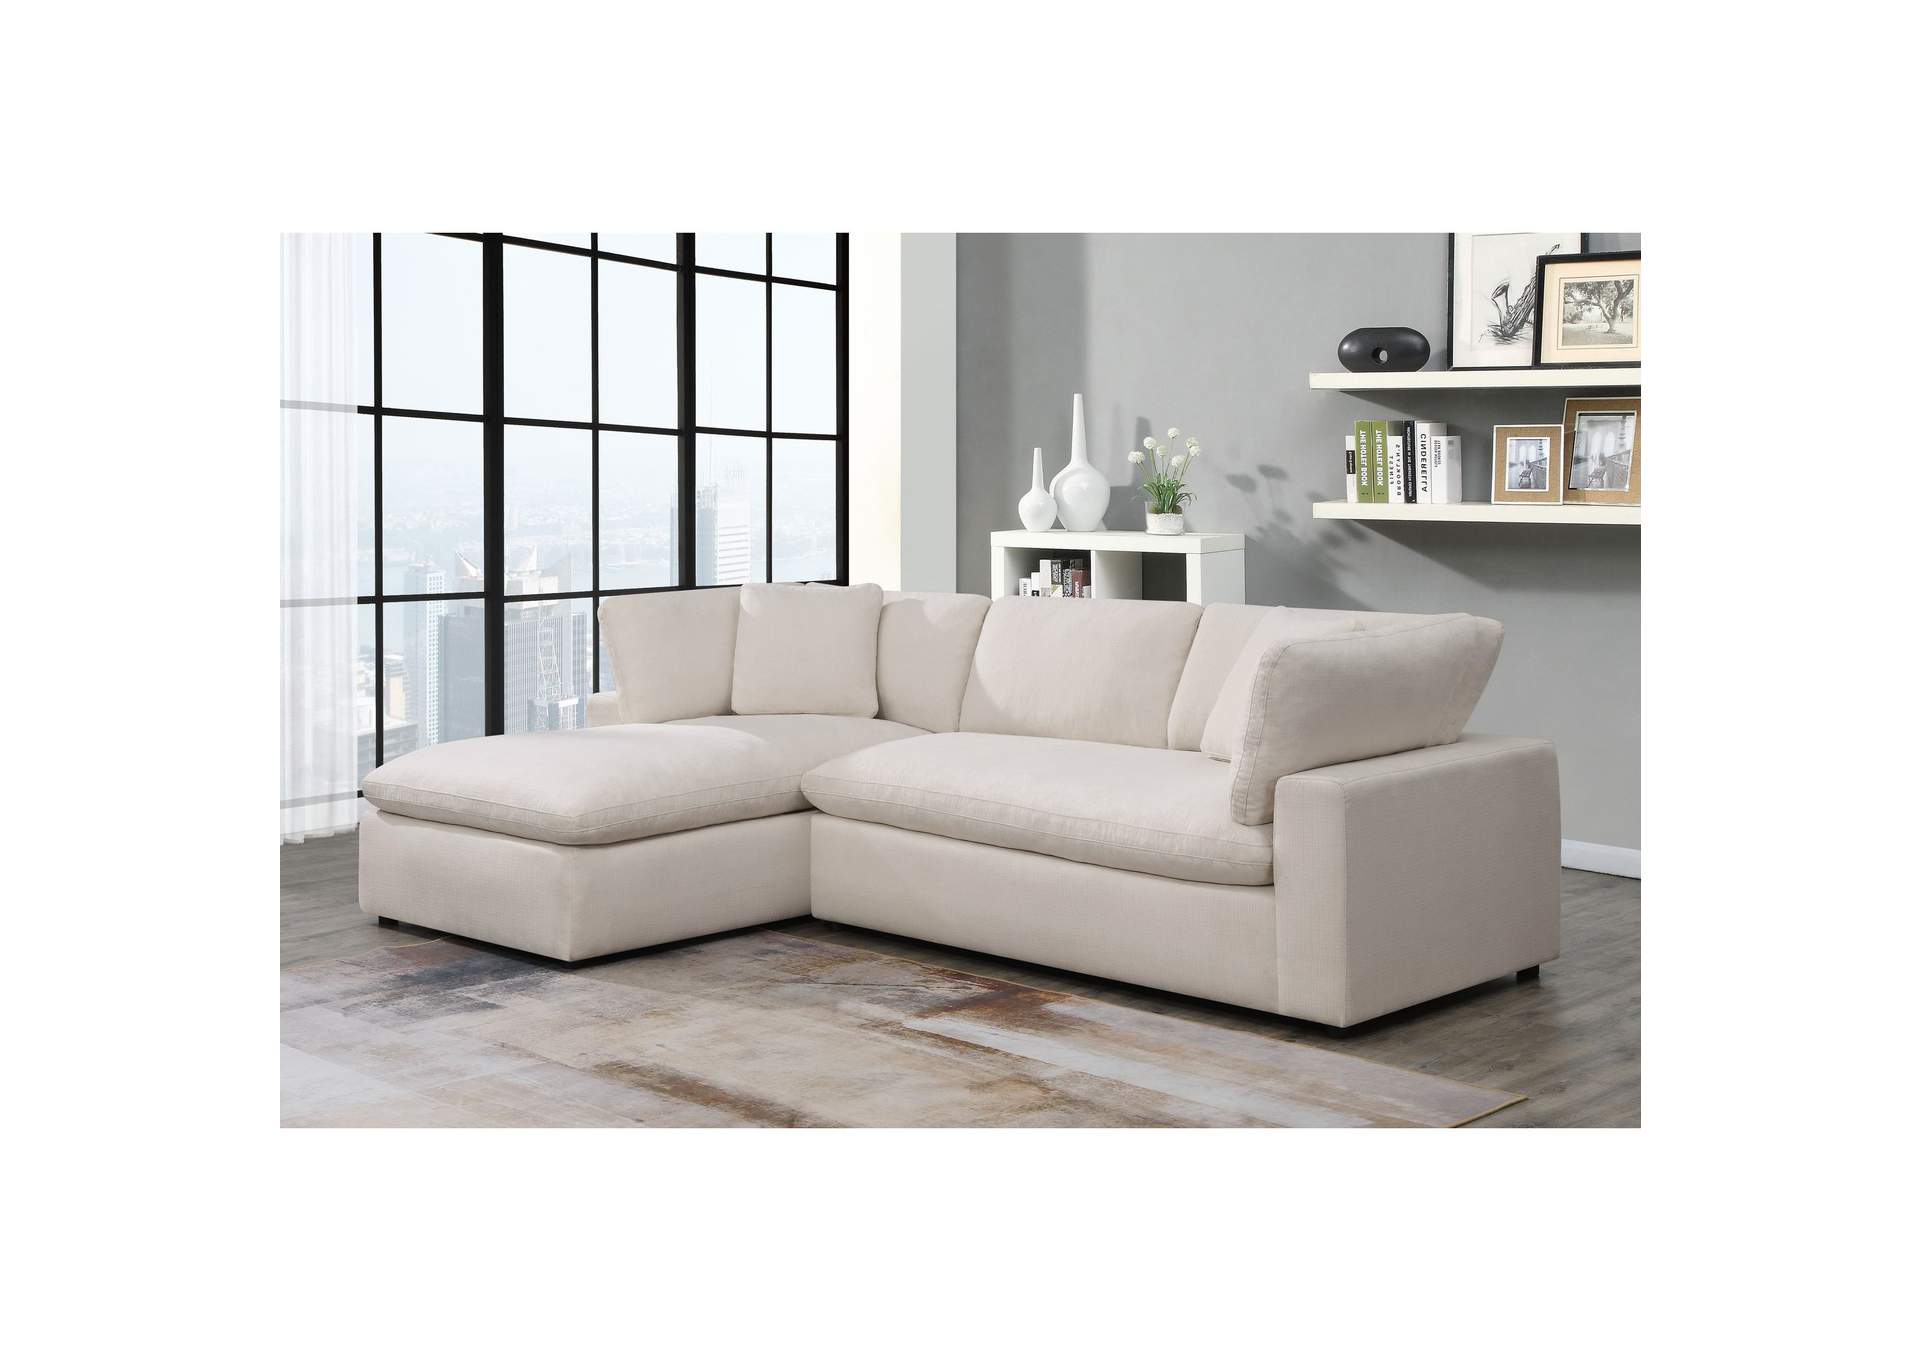 Cloud 9 Left Hand Facing Chaise In Aria Natural,Elements